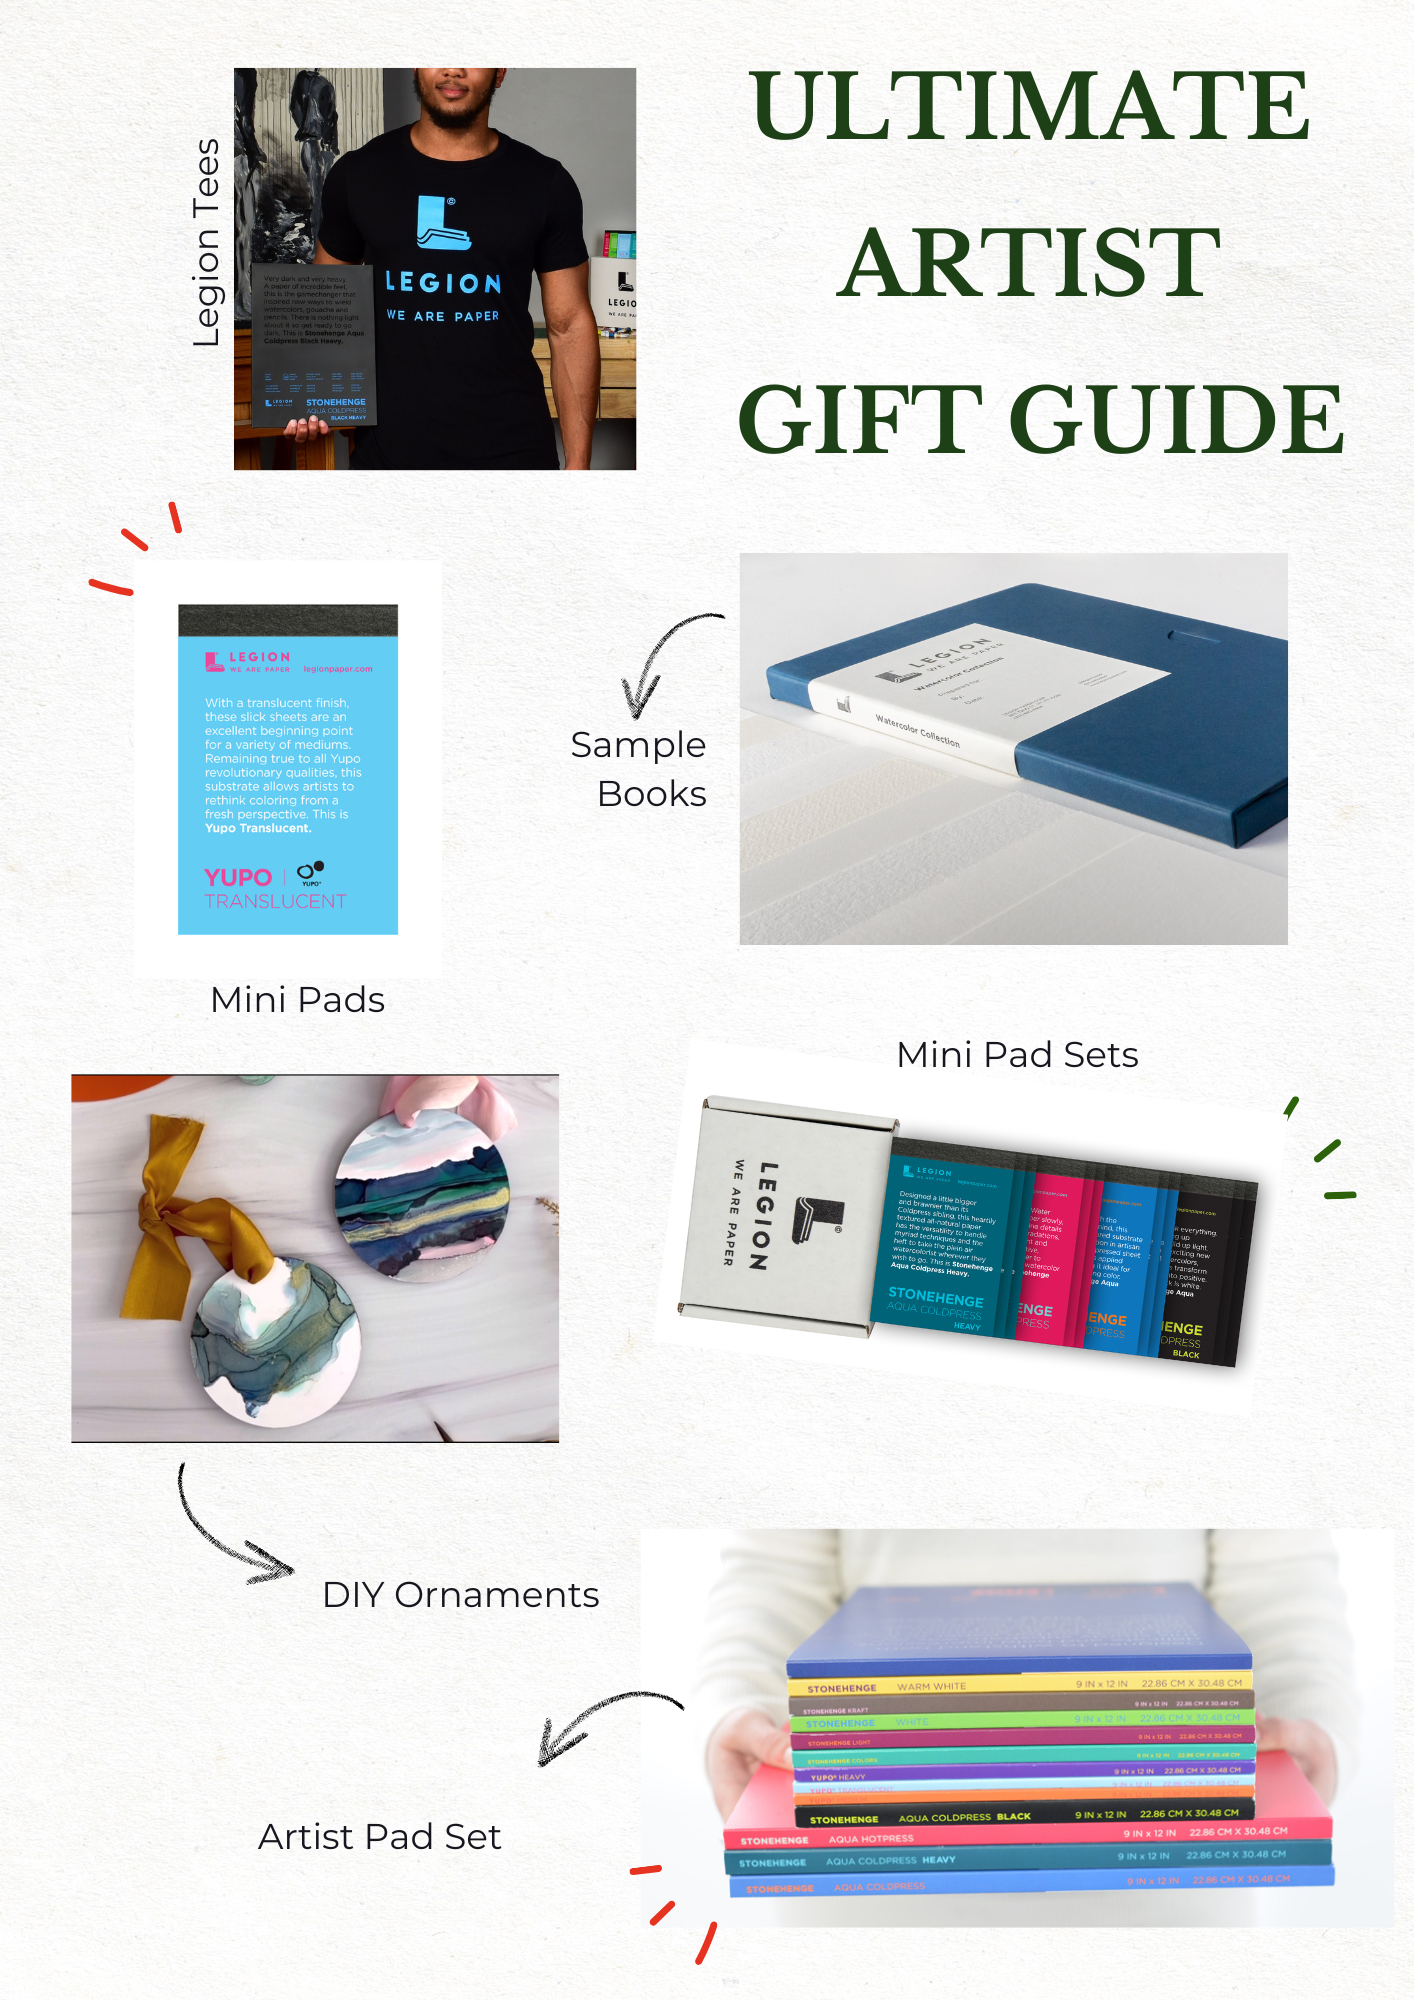 Gifts for artists ~ the ultimate Christmas gift guide - Pegasus Art Blog